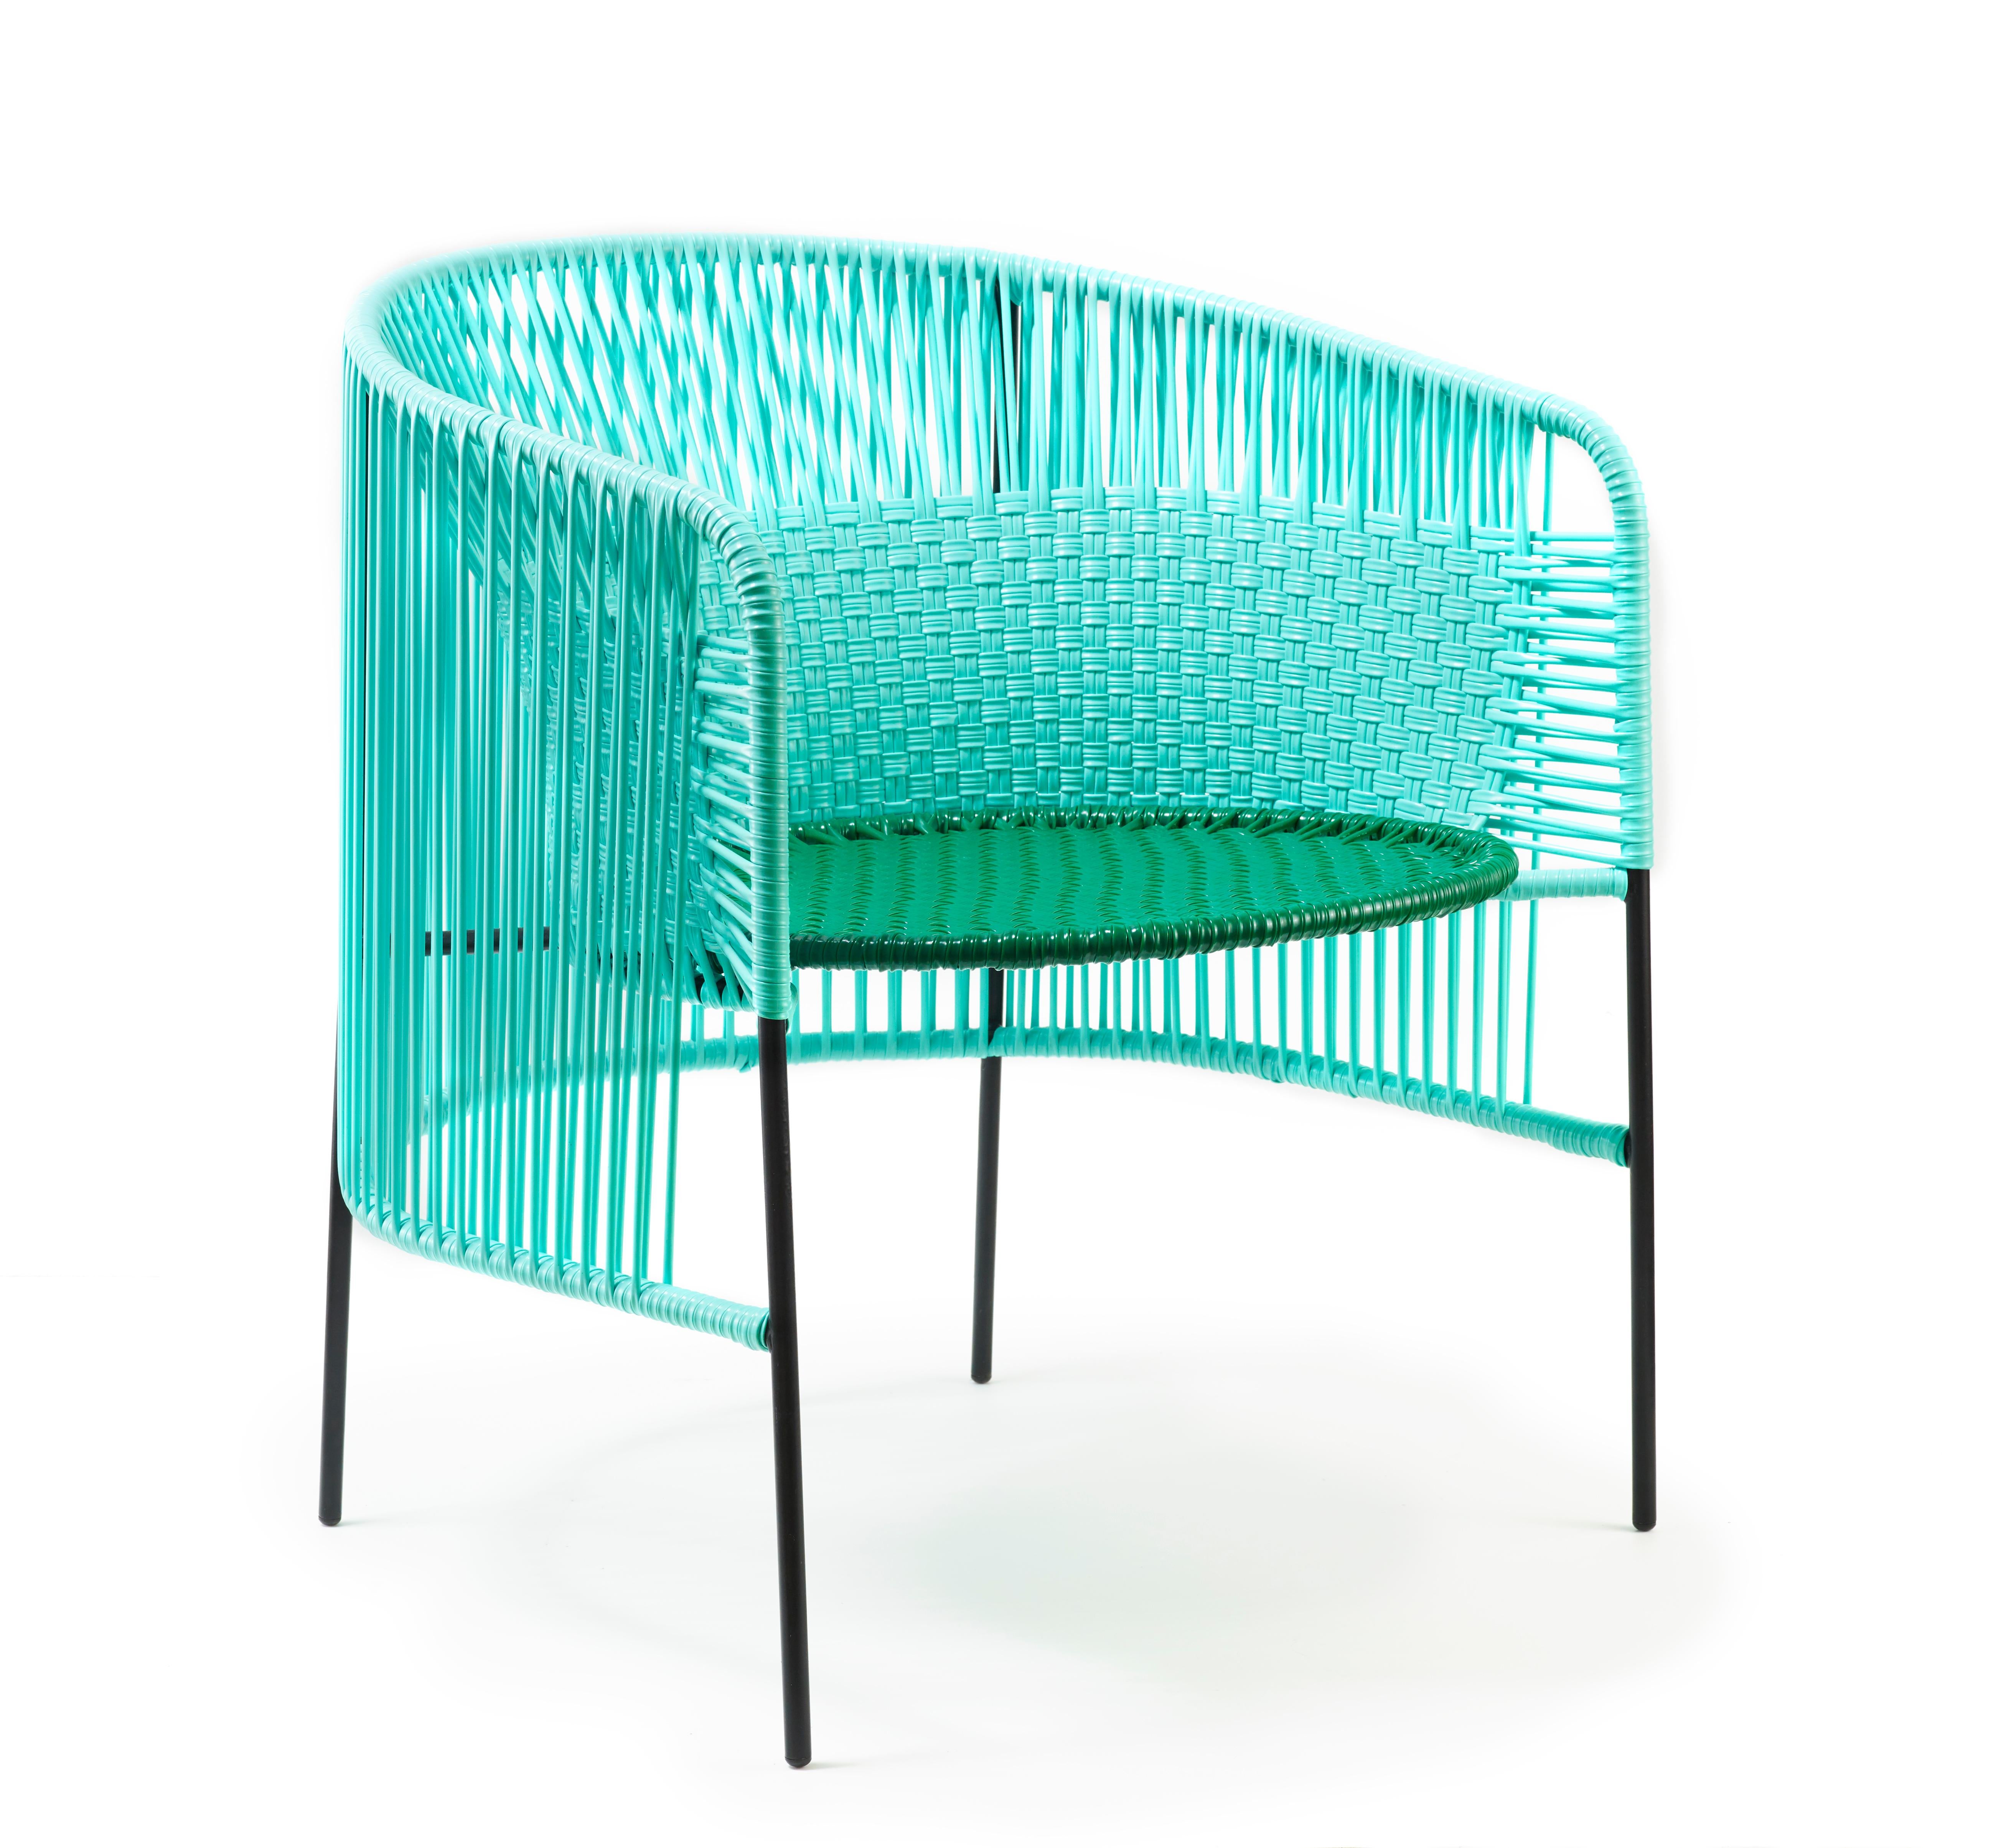 Mint caribe lounge chair by Sebastian Herkner
Materials: Galvanized and powder-coated tubular steel. PVC strings are made from recycled plastic.
Technique: Made from recycled plastic and weaved by local craftspeople in Colombia. 
Dimensions: W